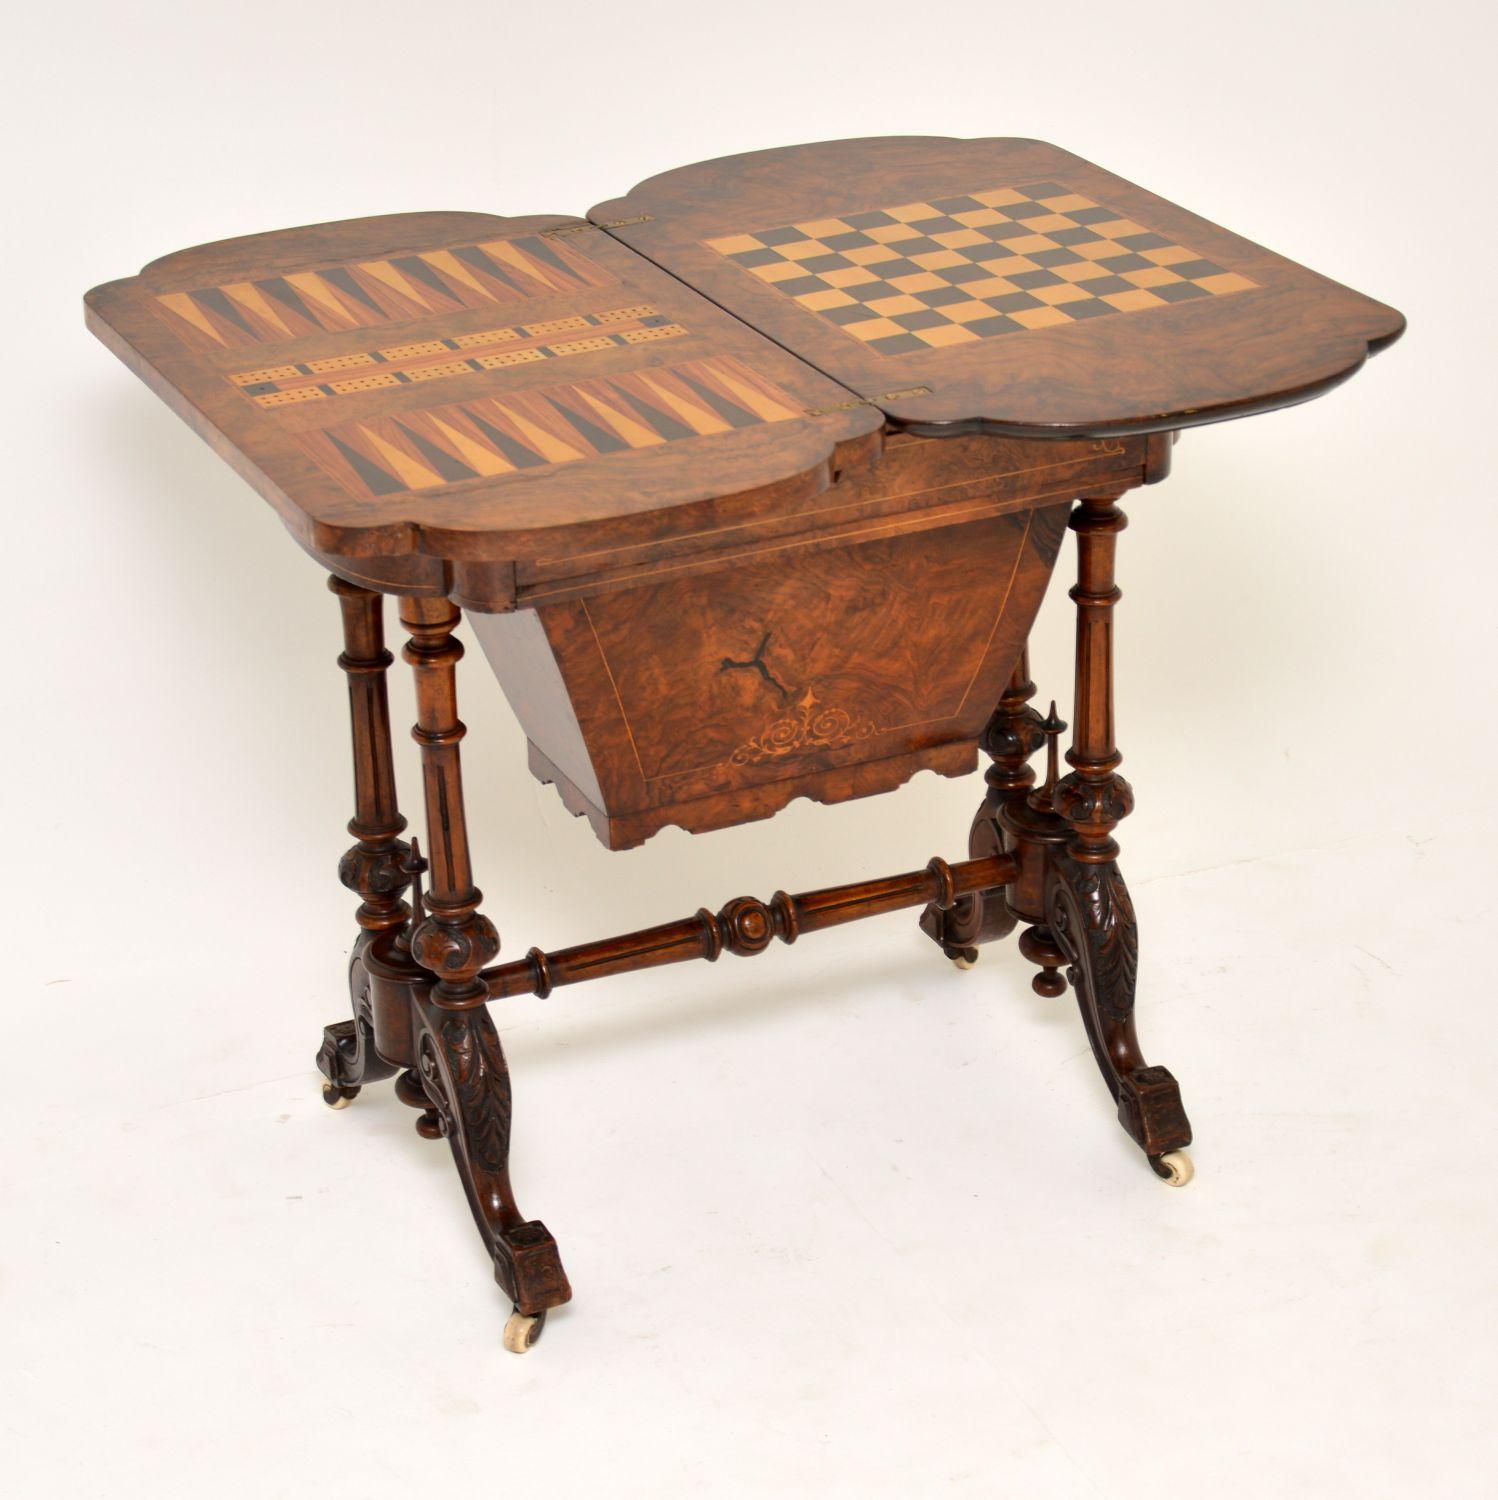 This is a very fine quality antique Victorian games and sewing table which has facilities for playing backgammon, chess and cribbage. Dating from circa 1870s, it’s in excellent original condition, free from warps and splits. The wood is